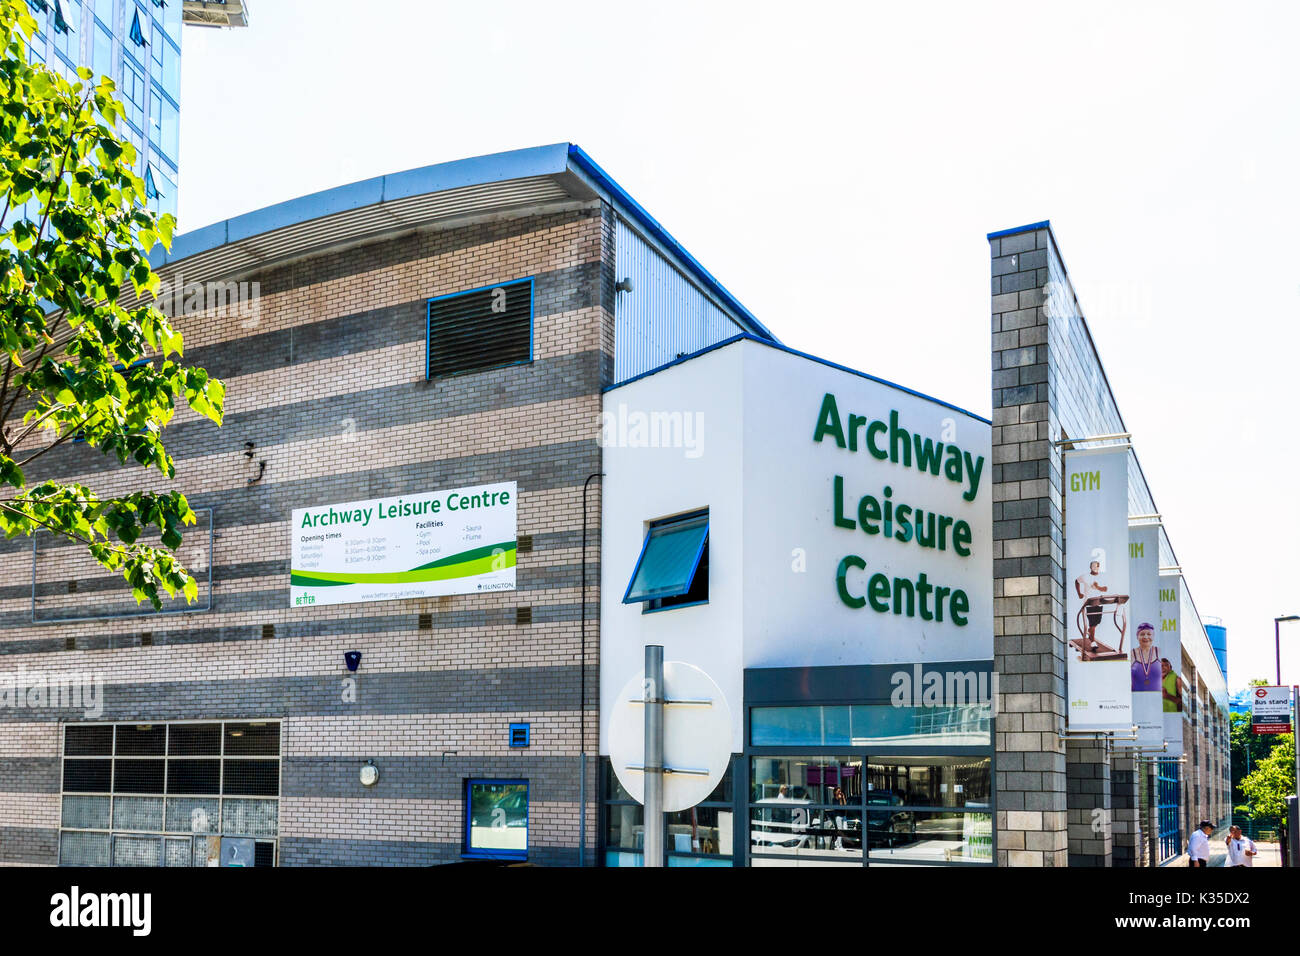 Archway Leisure Centre, North London Stock Photo